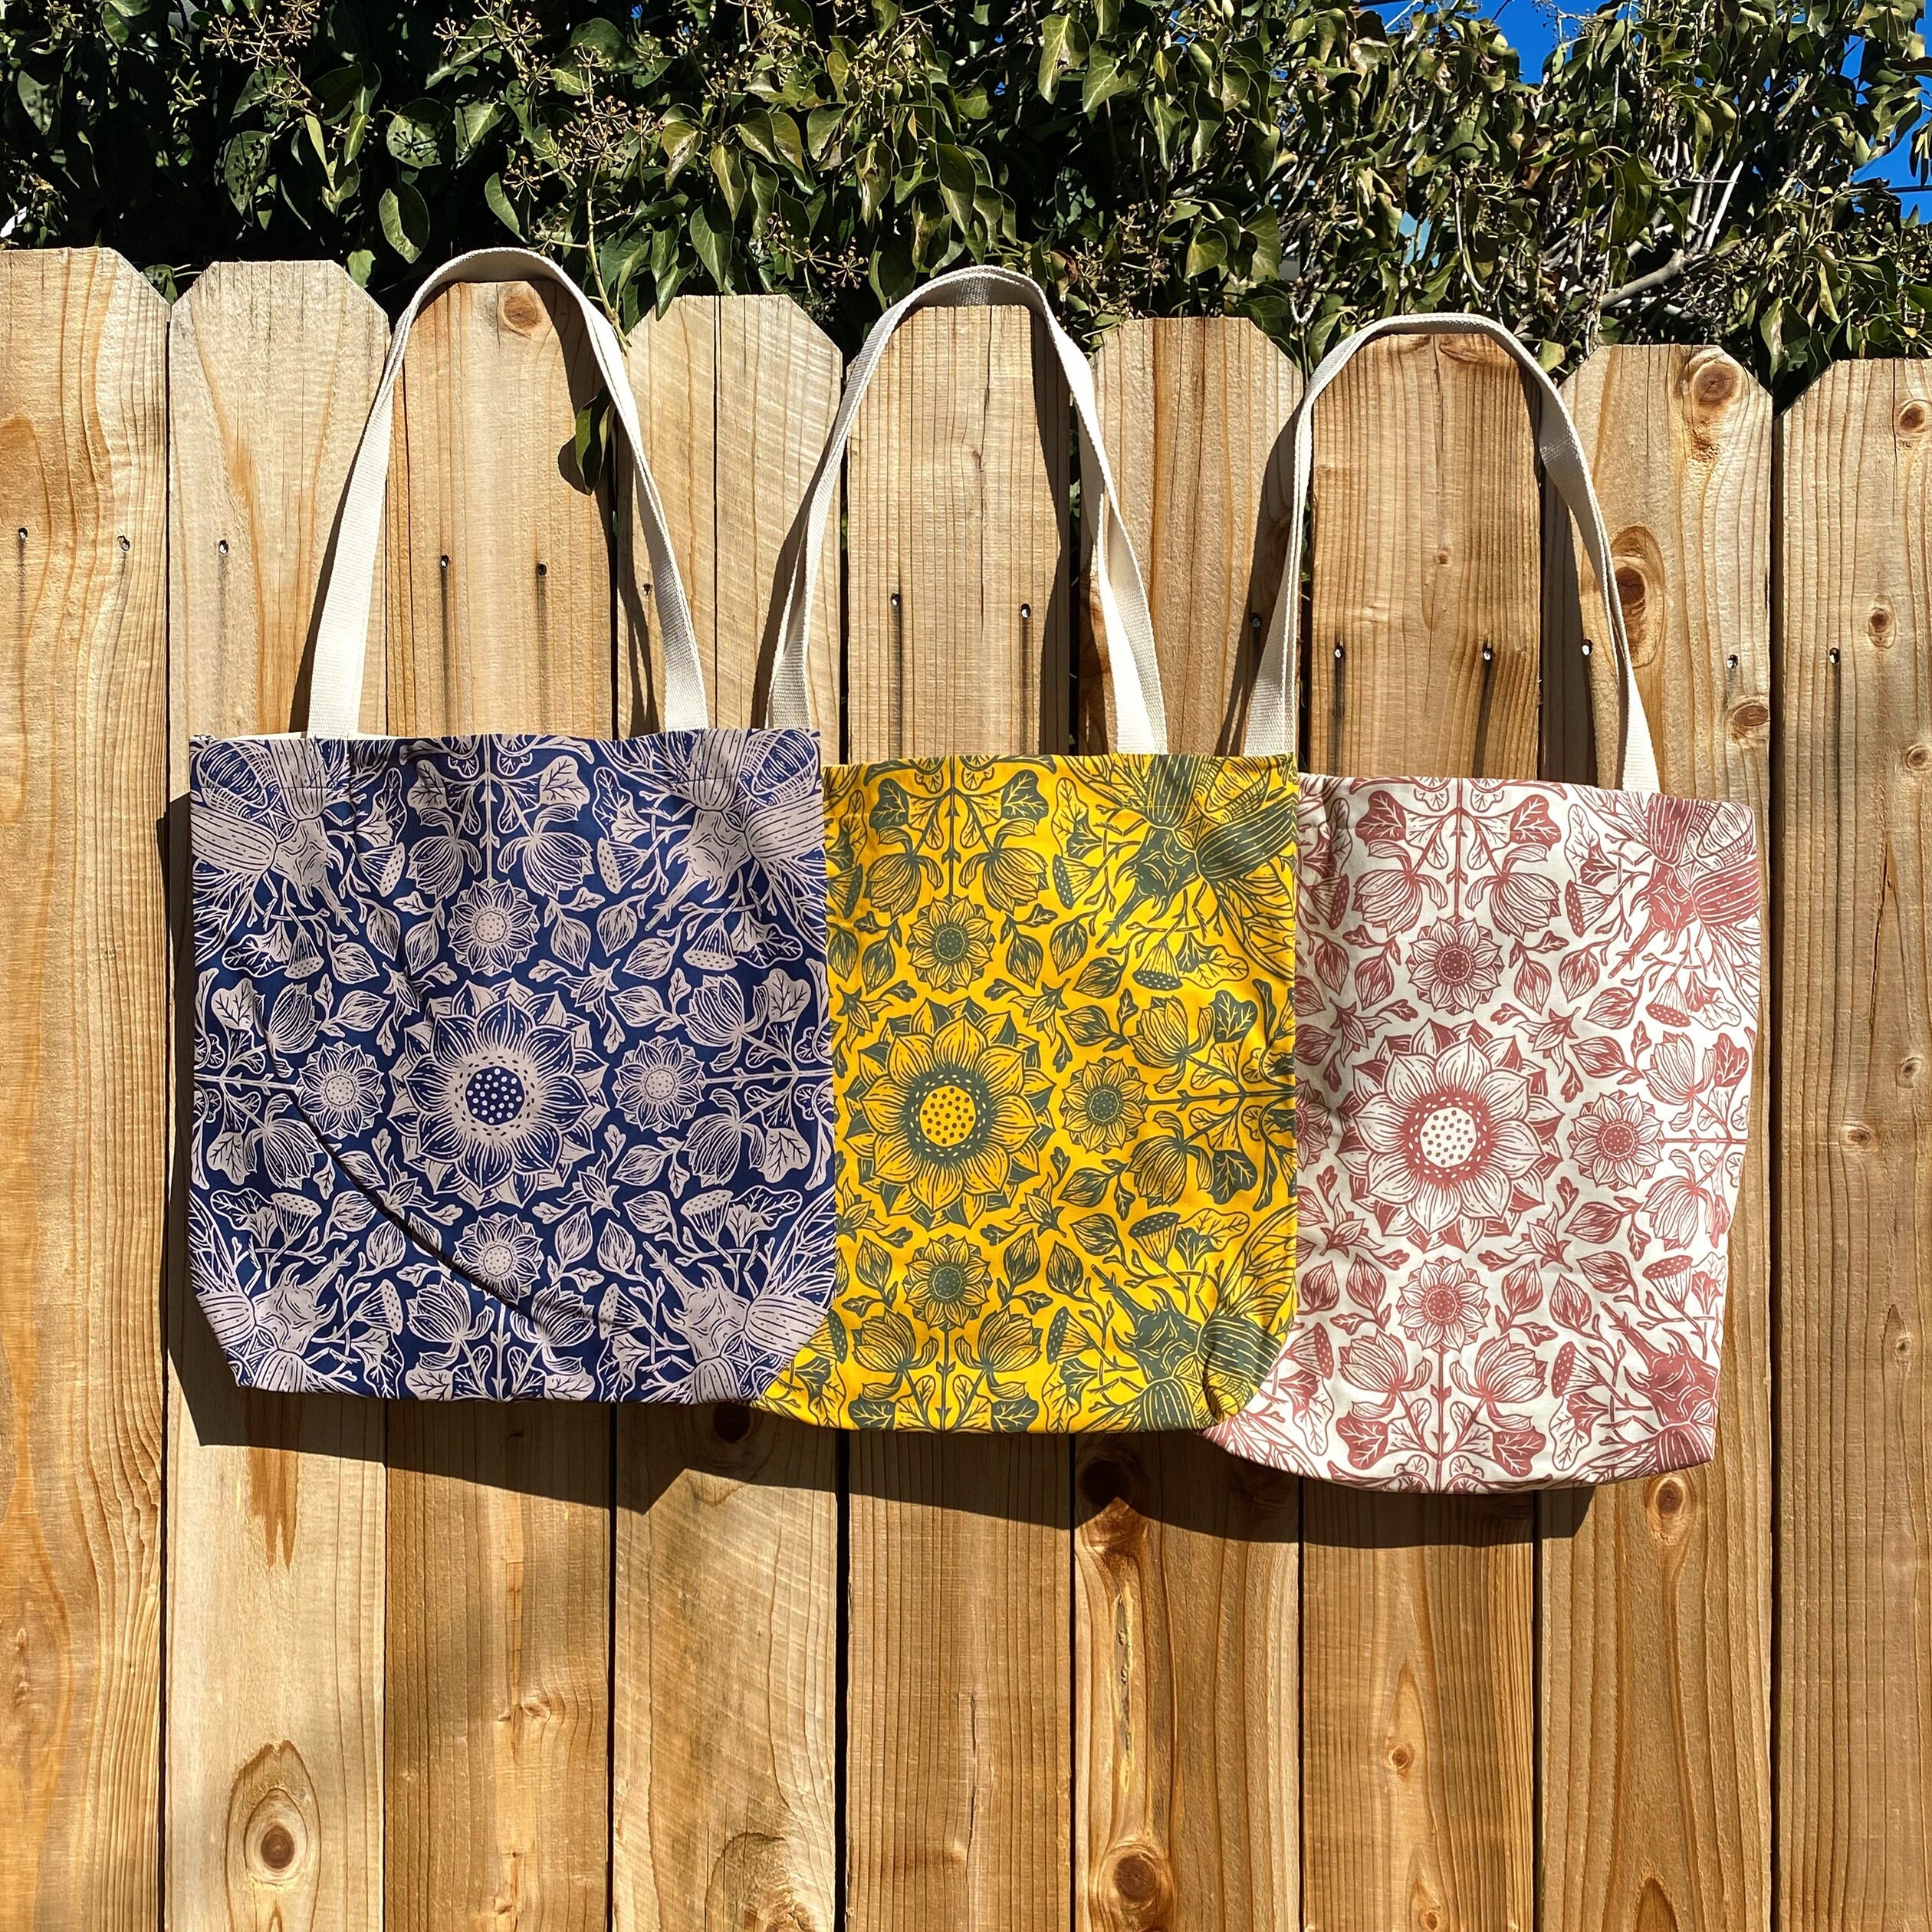 Bags by Diane - Handmade & 100% Recycled Material